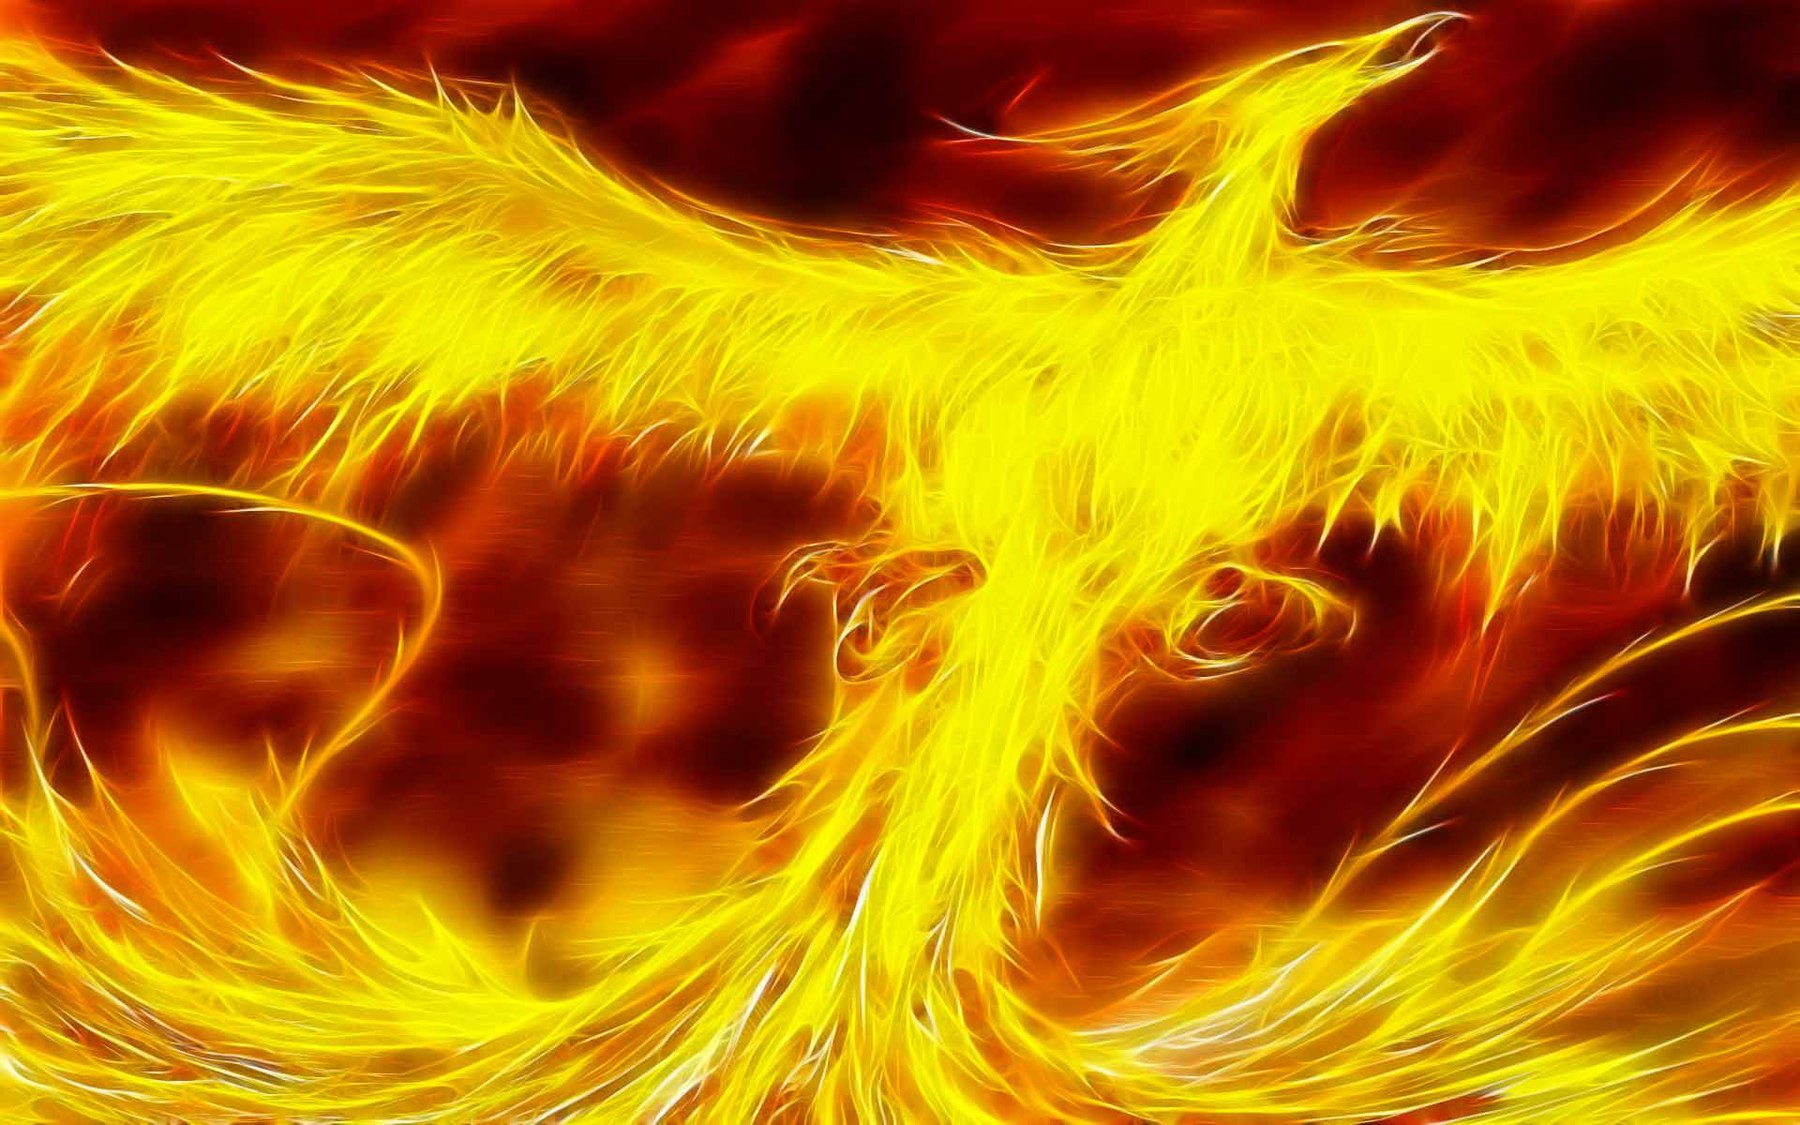 If you see some Phoenix Bird Wallpapers Free Download you’d like to use